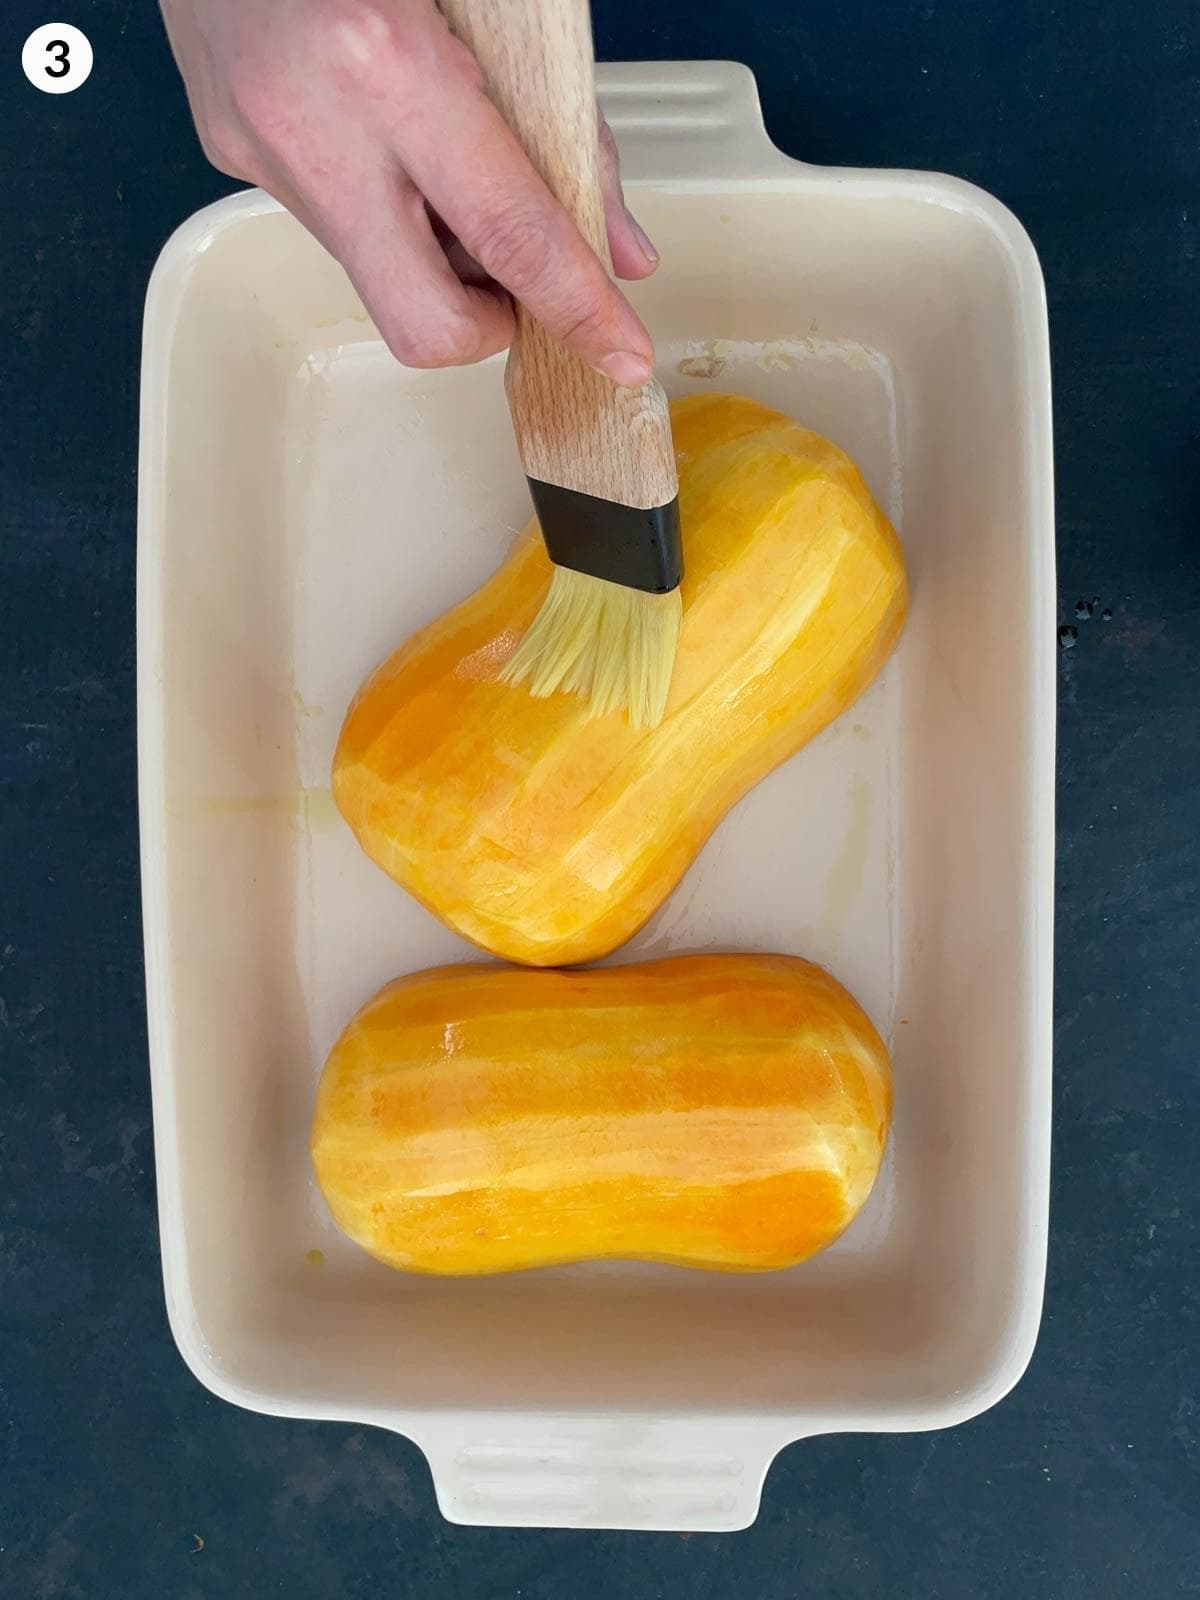 Basting butternut squash halves with olive oil in a baking dish